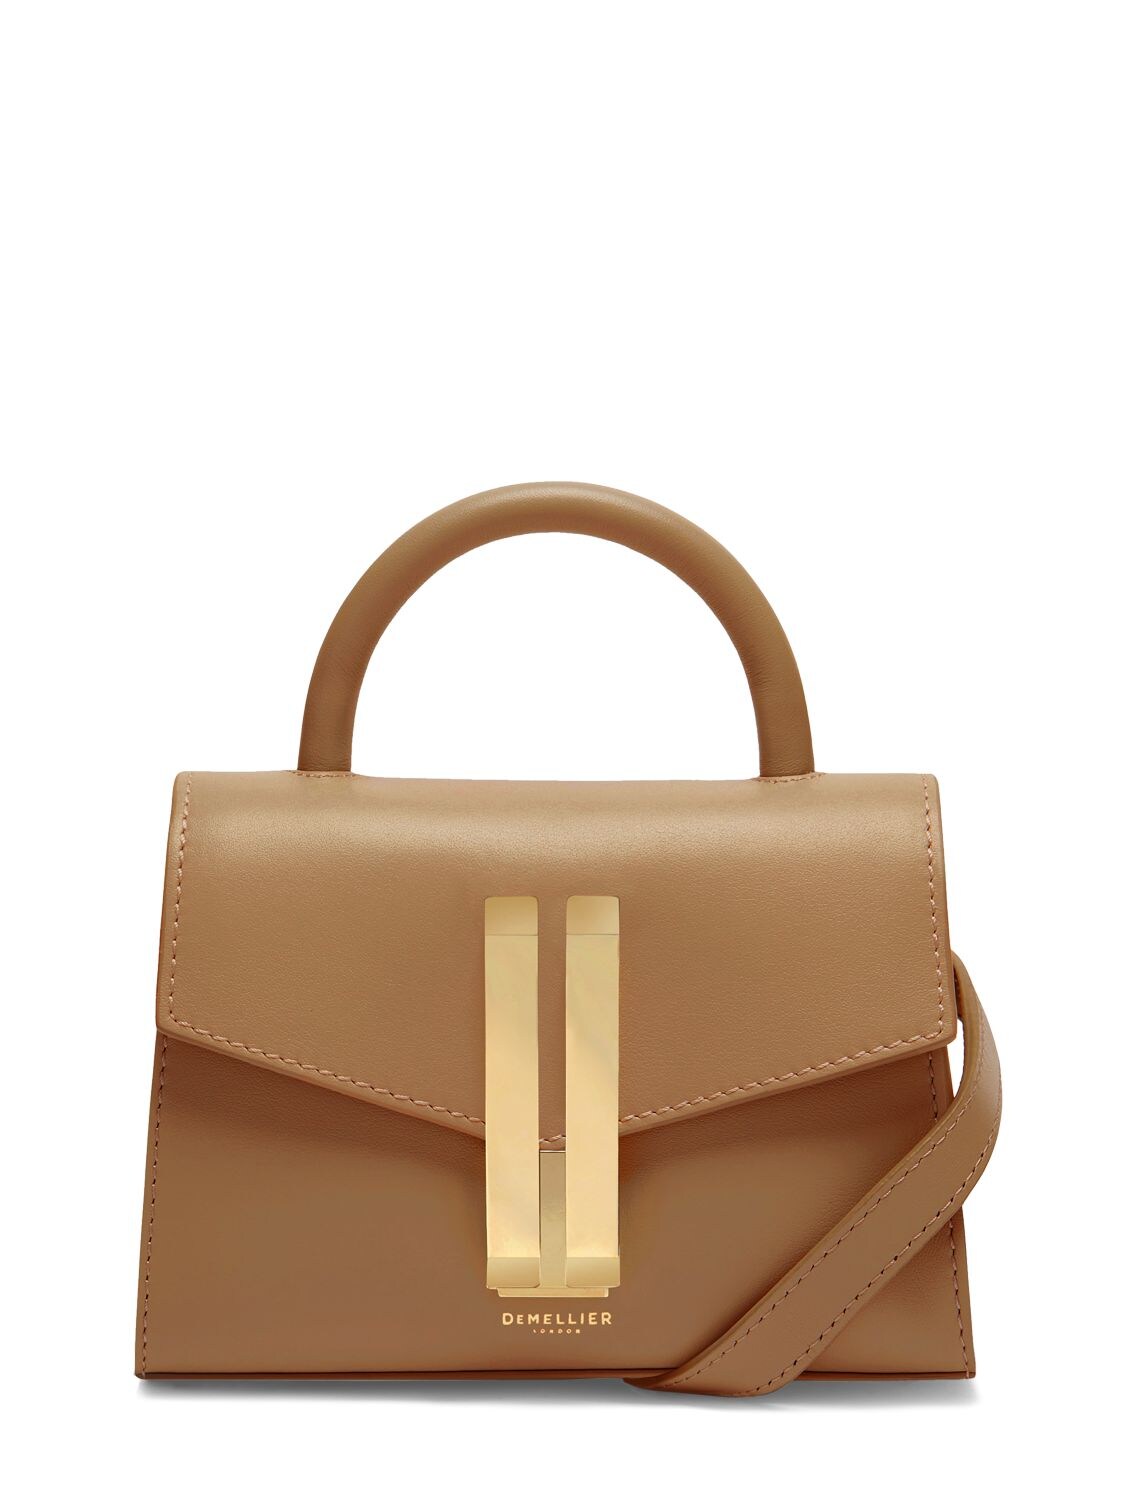 Demellier Nano Montreal Smooth Leather Bag In Deep Toffee